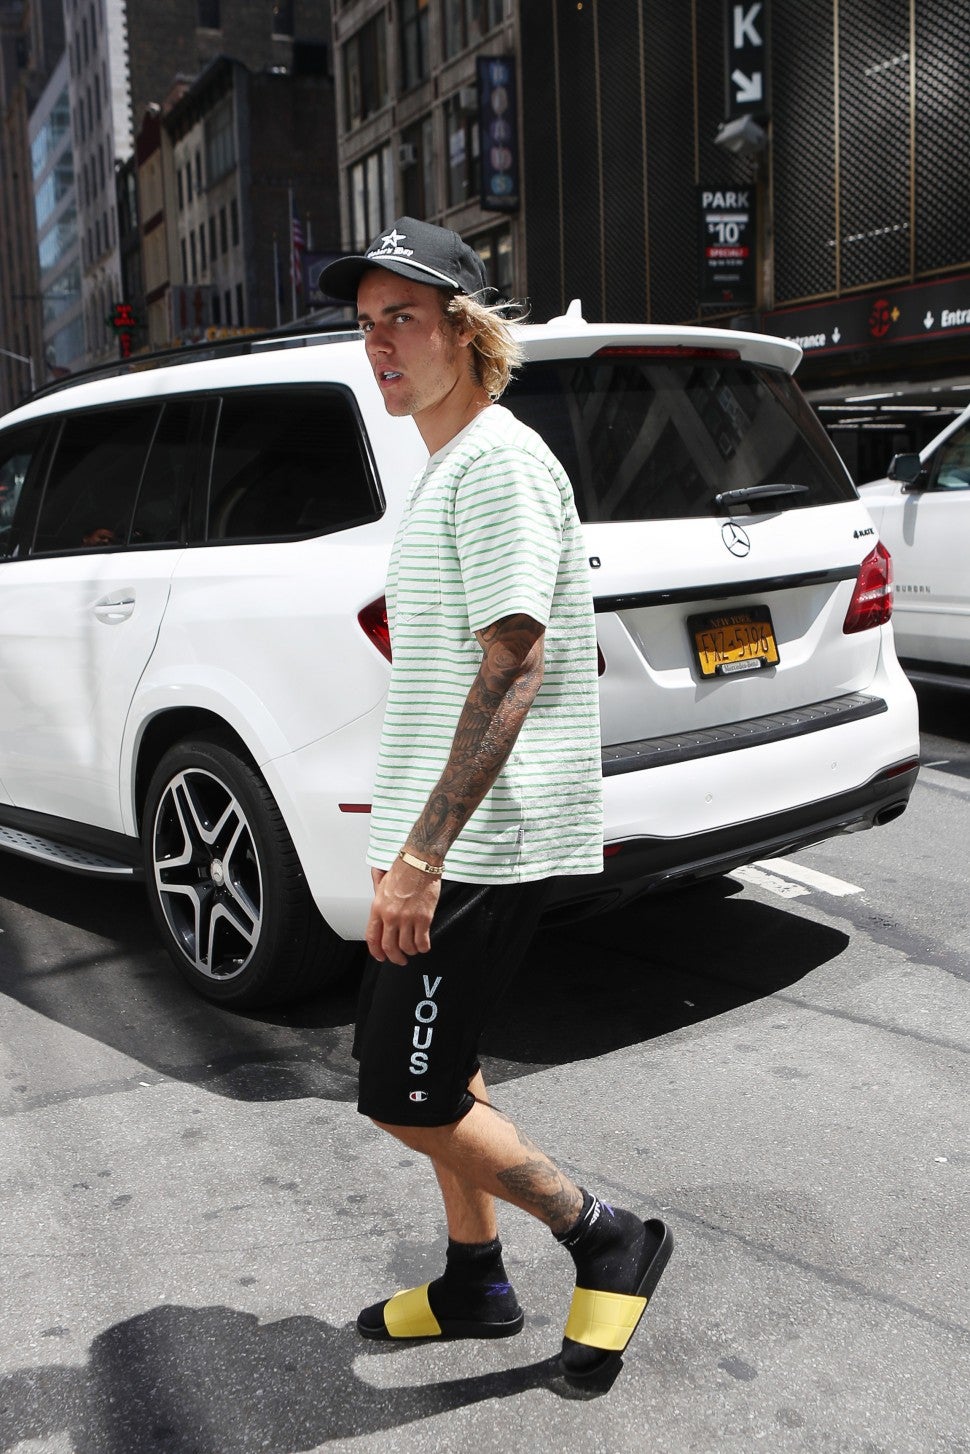 Justin Bieber in New York City on July 10, 2018.